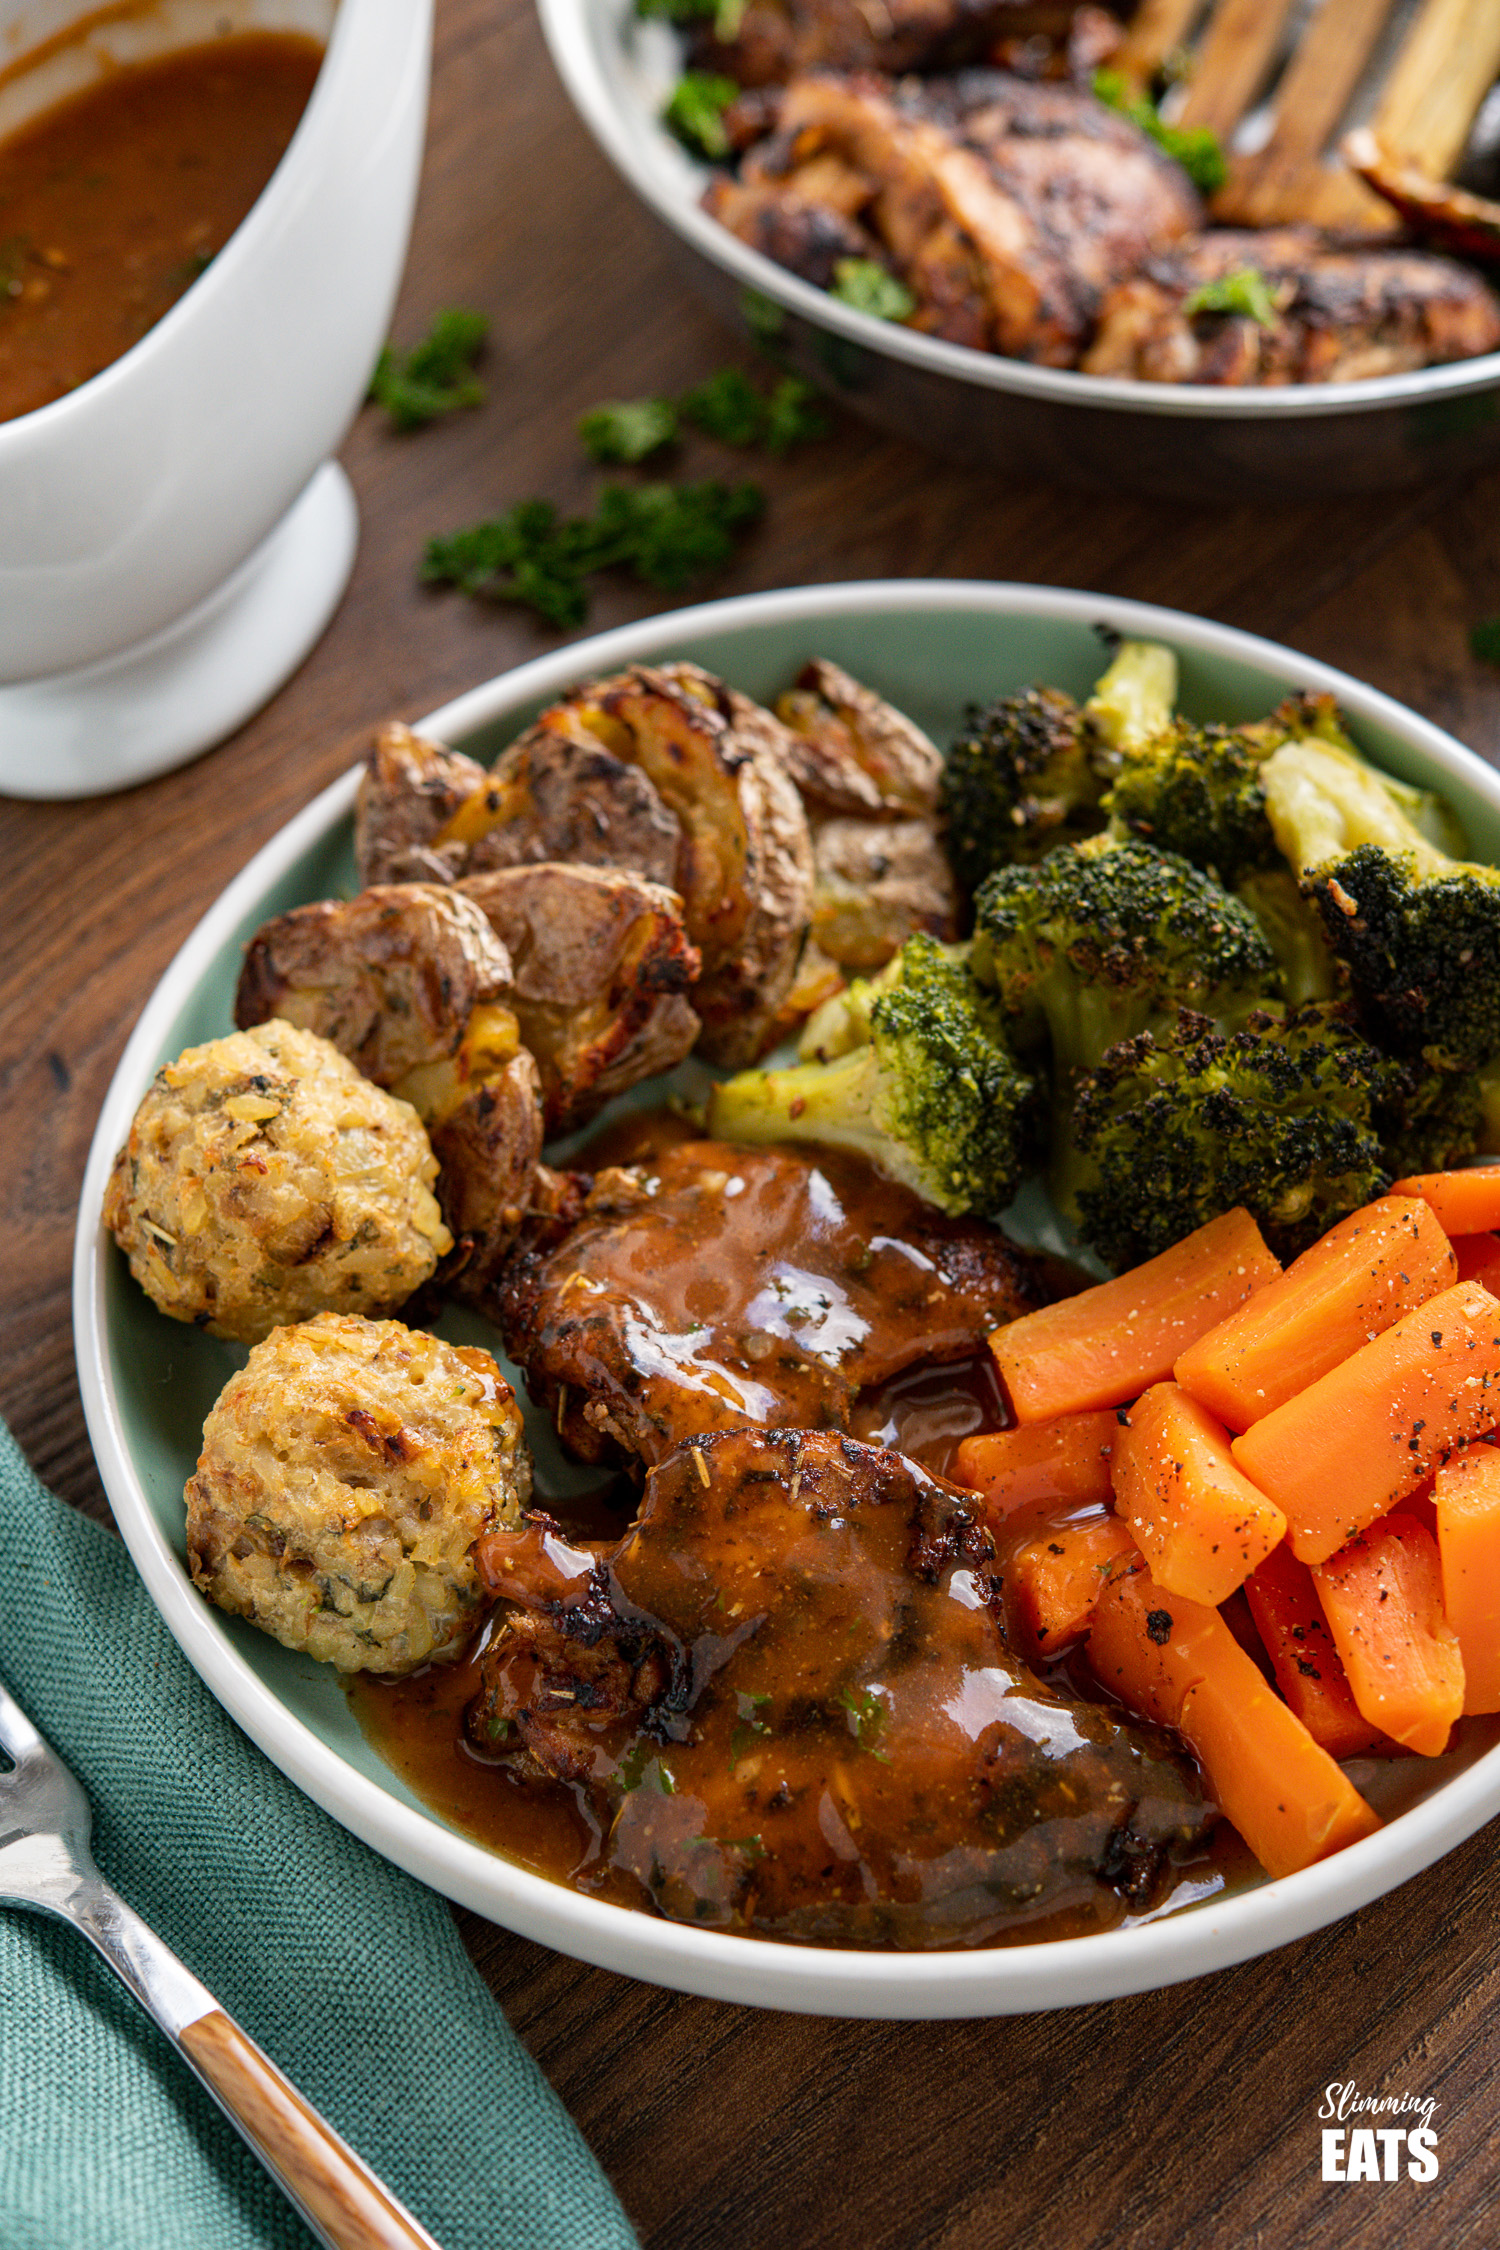 Seasoned Chicken with Rich Gravy on teal plate with stuffing balls, crushed potatoes, broccoli and carrots, jug of gravy in background.